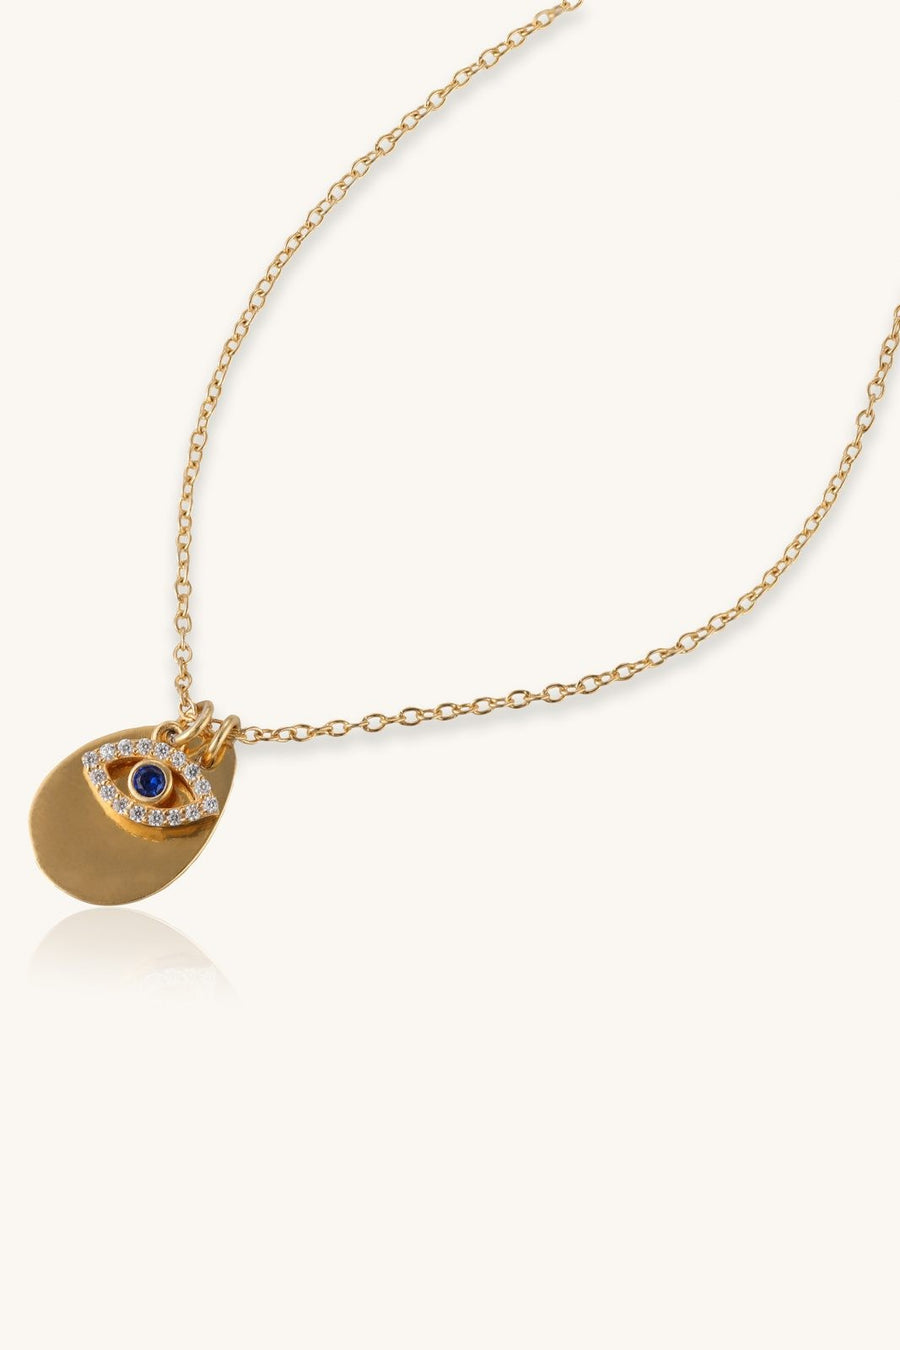 Gods Eye Necklace, jewelry, symbolism, ancient, cultural, significance, craftsmanship.